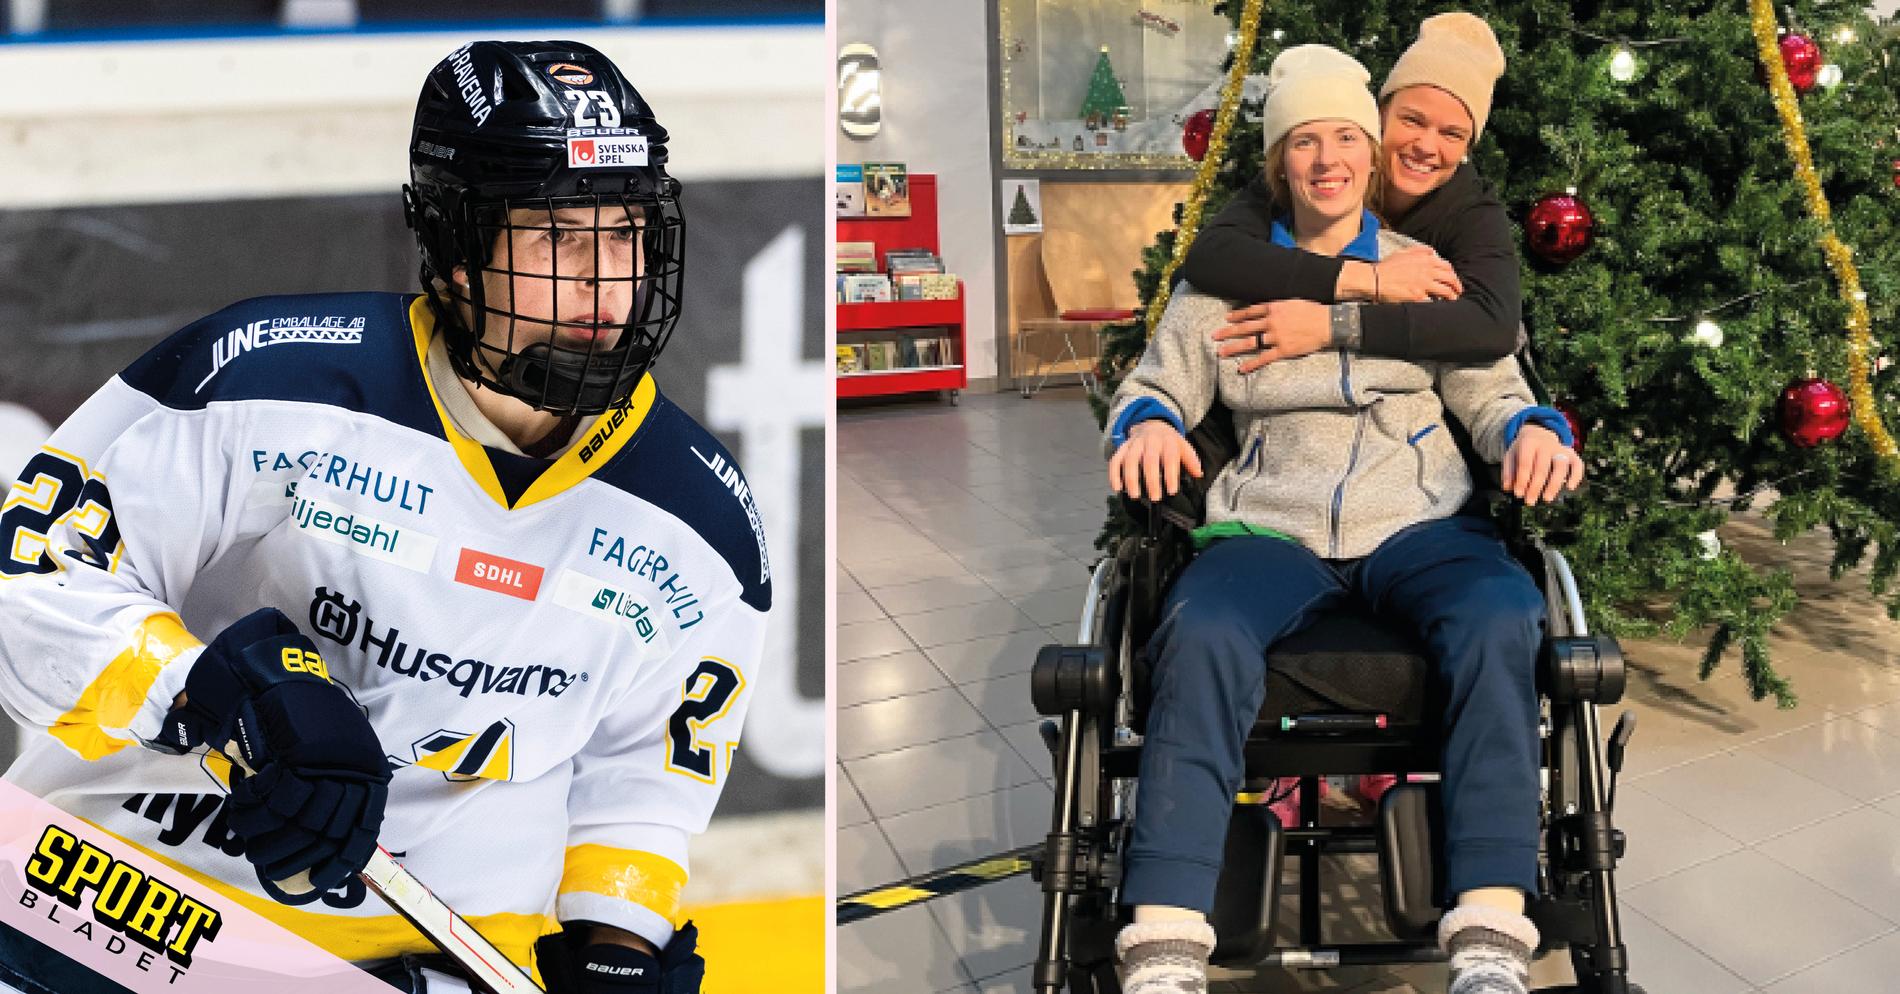 HV71’s Sanni Hakala Thanks Supporters After Serious Accident